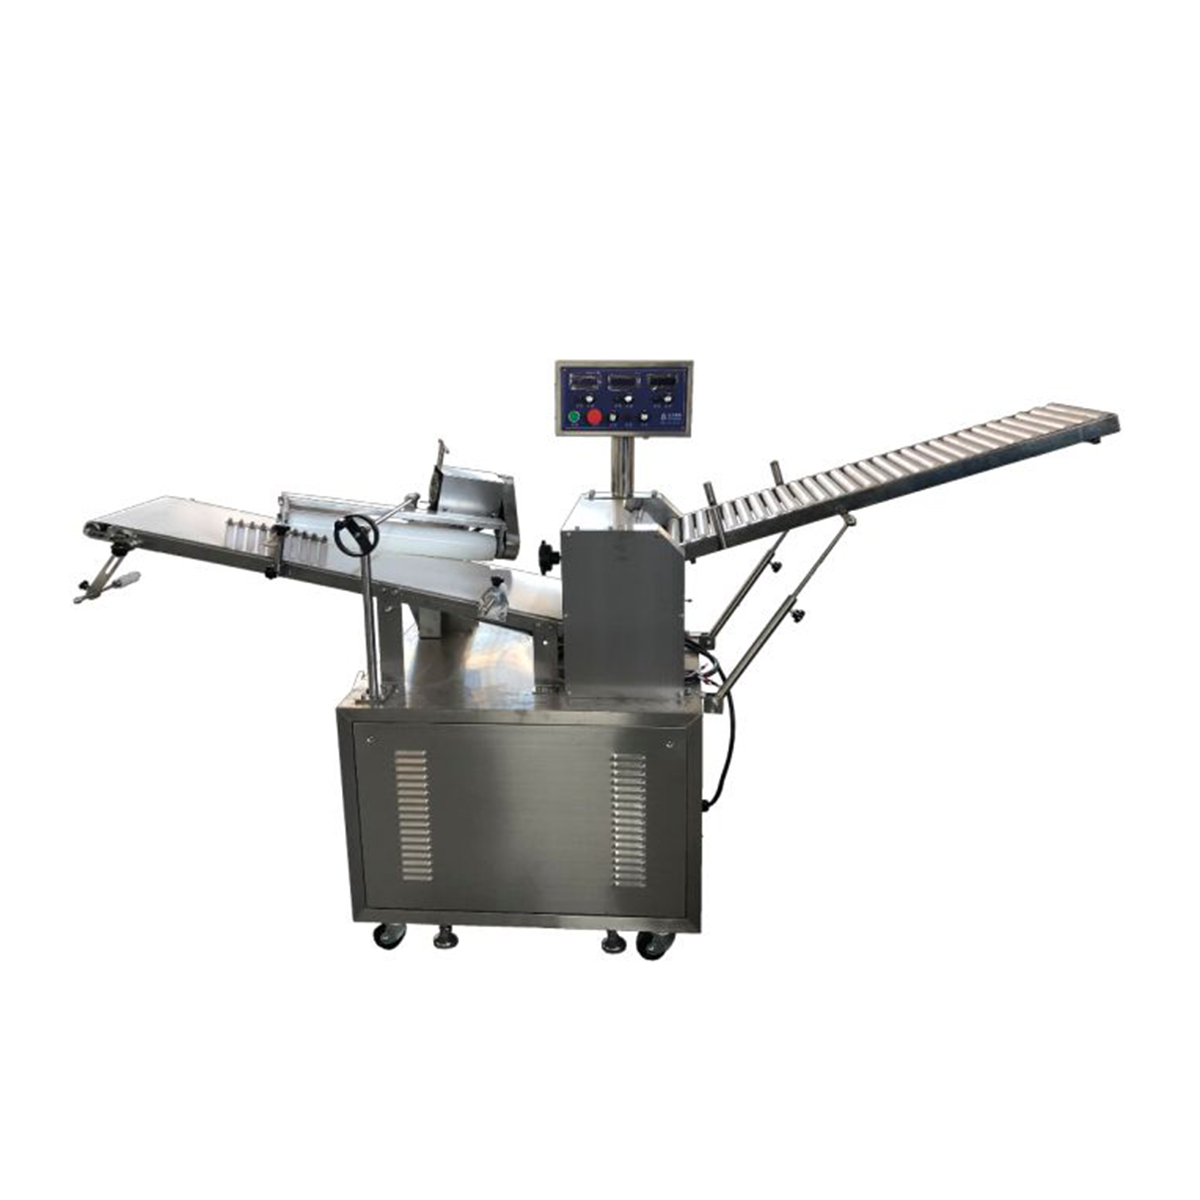 300mm Roller Width Dough Sheeter Commercial Dough Roller Sheeter Automatically Suitable for Noodle Pizza Bread etc.